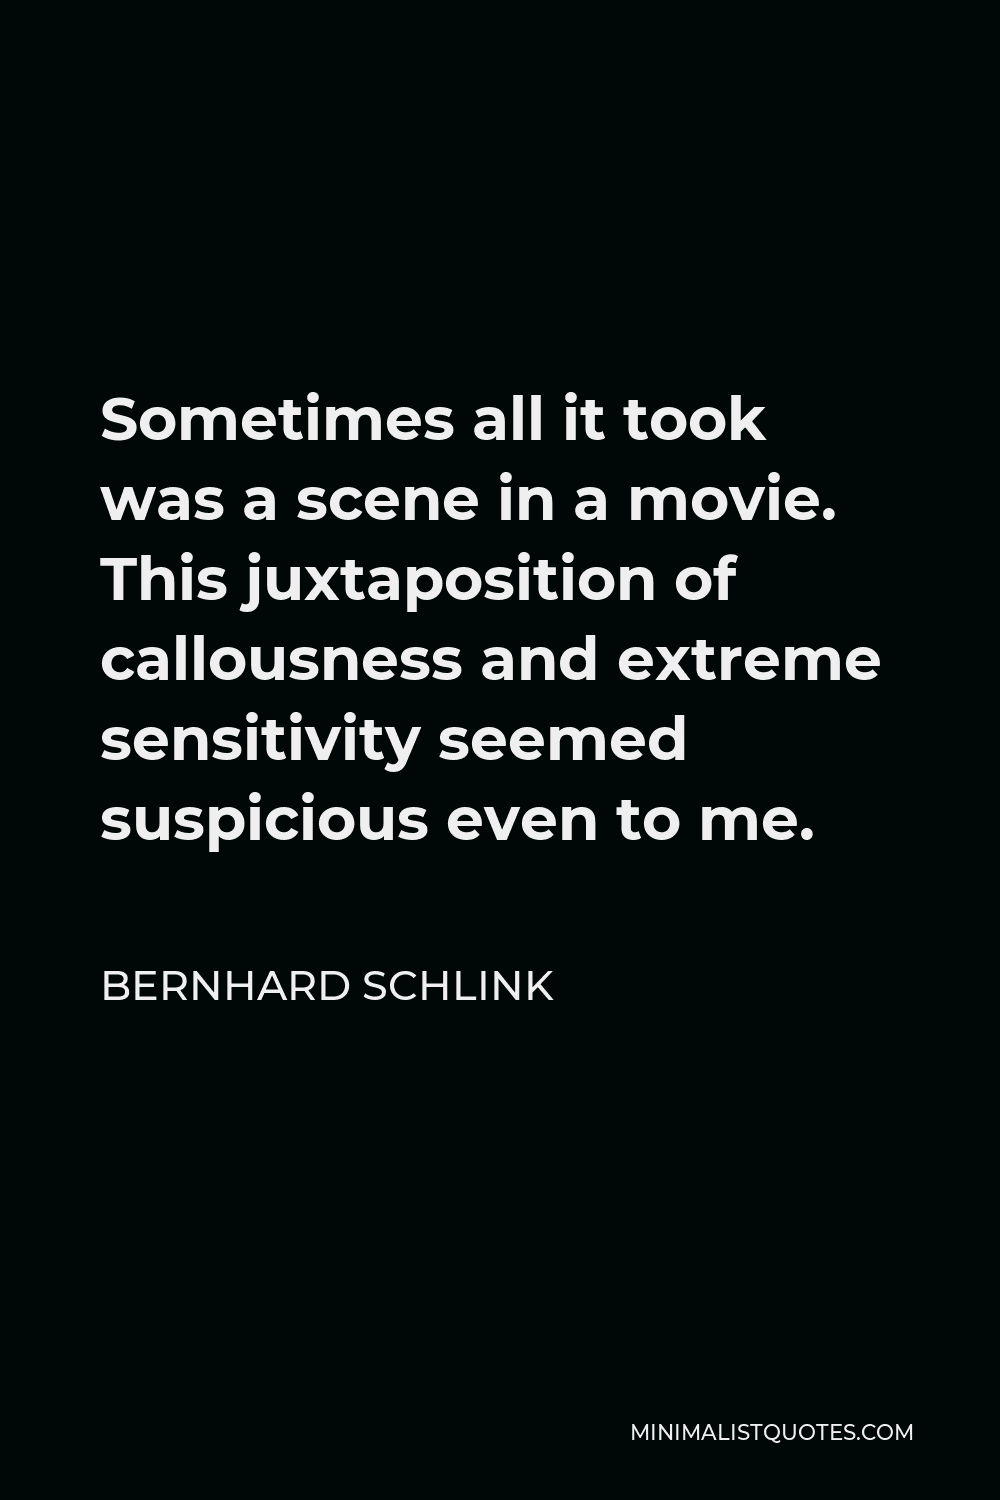 Bernhard Schlink Quote - Sometimes all it took was a scene in a movie. This juxtaposition of callousness and extreme sensitivity seemed suspicious even to me.